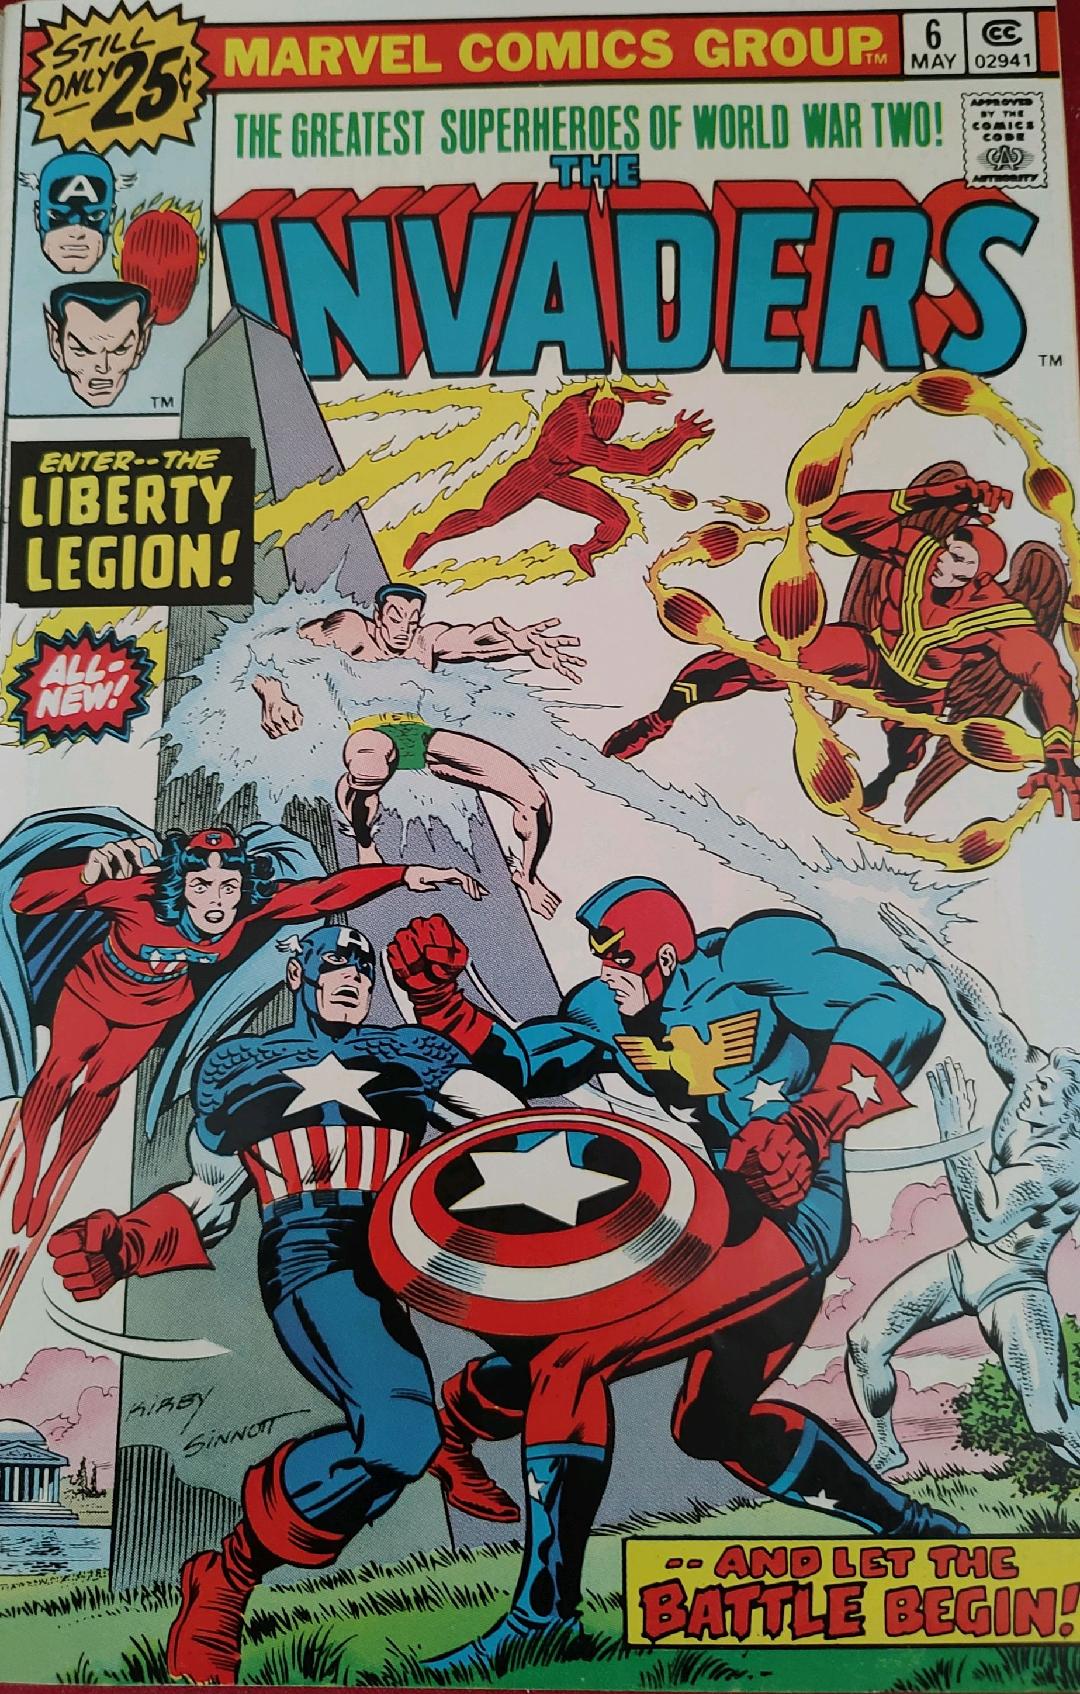 The Invaders #6 Comic Book Cover